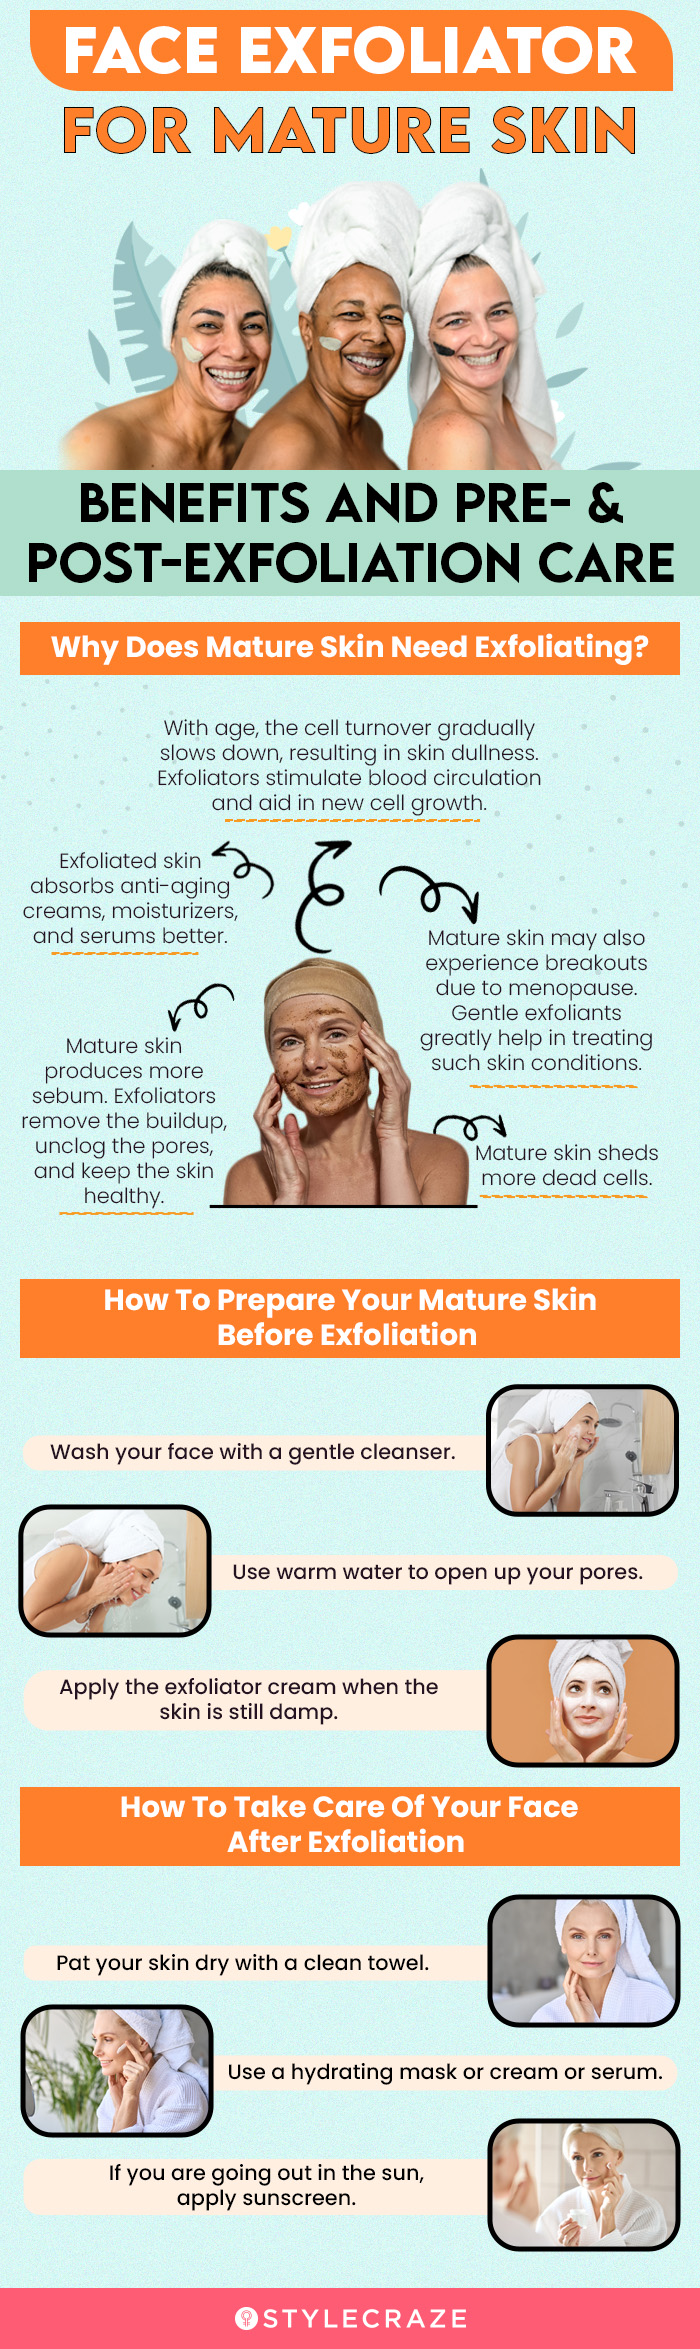 Face Exfoliator For Mature Skin: Benefits And Pre- & Post-Exfoliation Care (infographic)